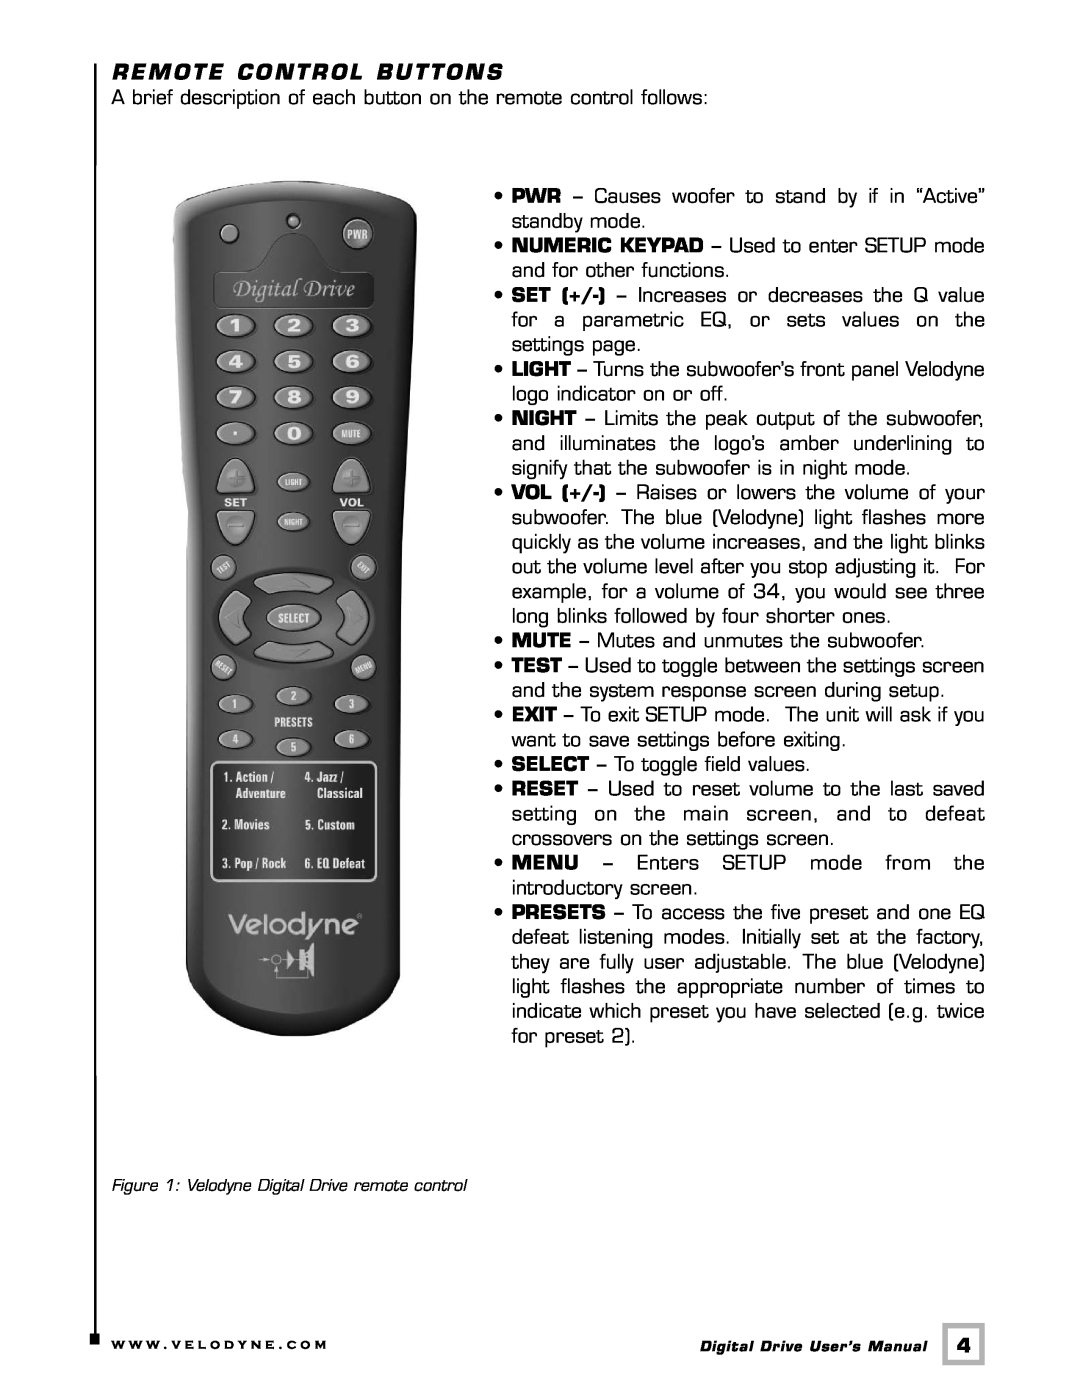 Velodyne Acoustics Digital Drive user manual Remote Control Buttons 